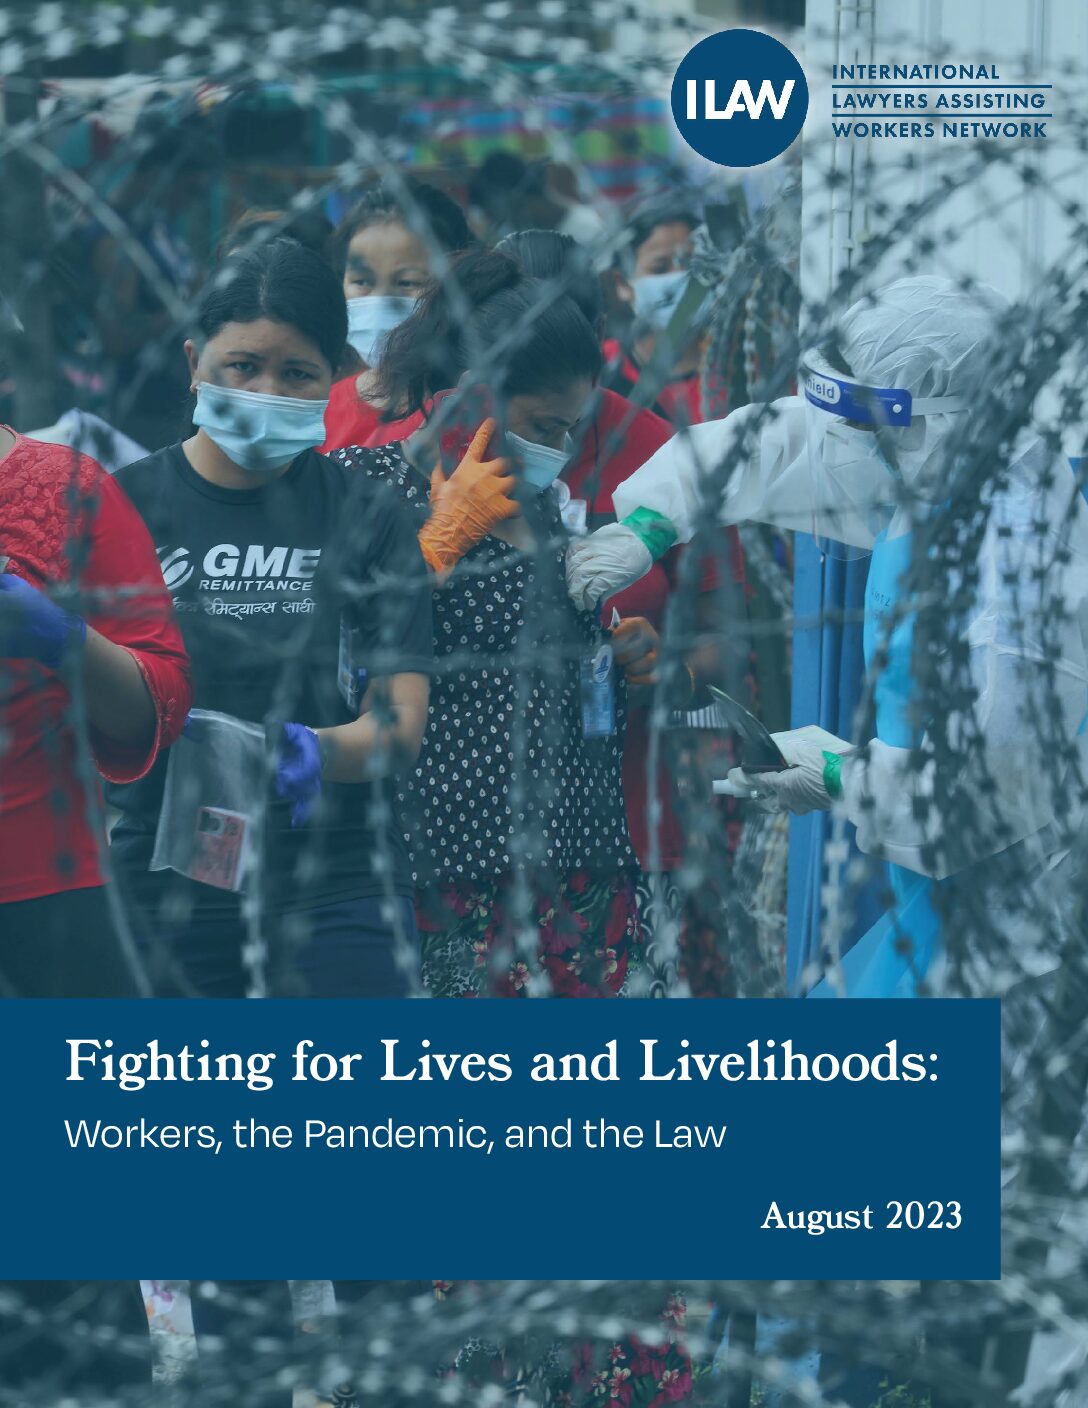 Fighting for Lives and Livelihoods: Workers, the Pandemic and the Law